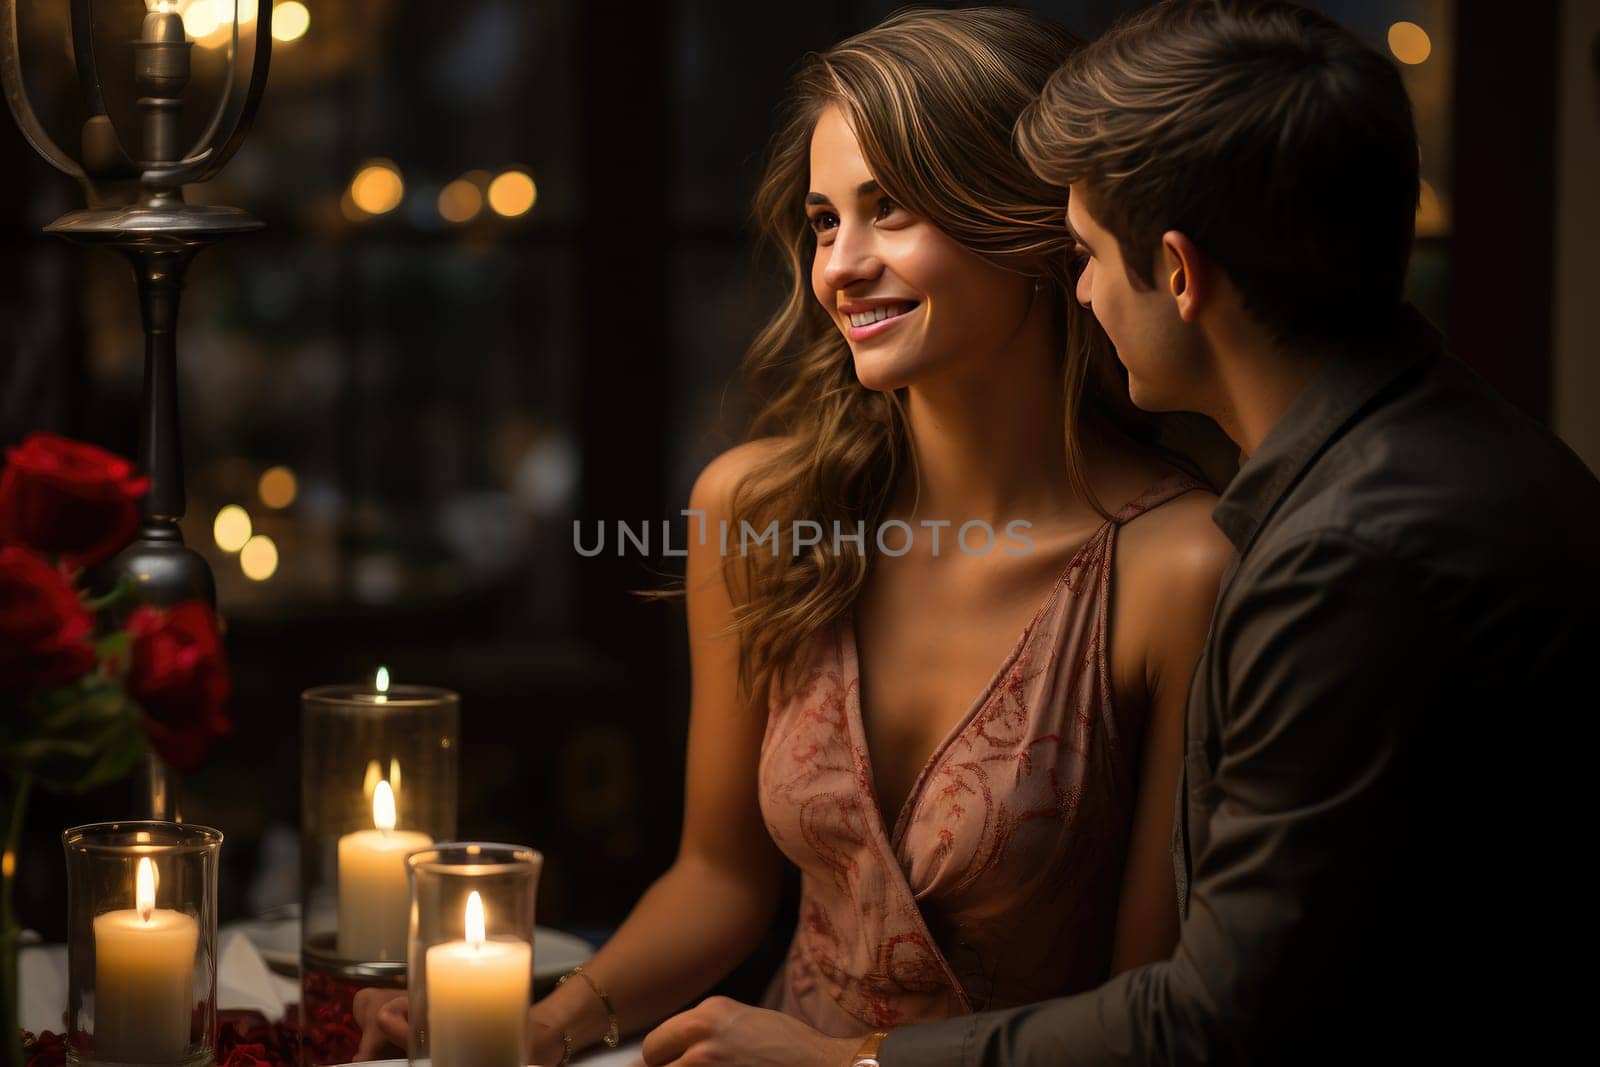 Sweet Ritual: A Woman Throws a Romantic Valentine's Day Dinner for Her Husband by Yurich32